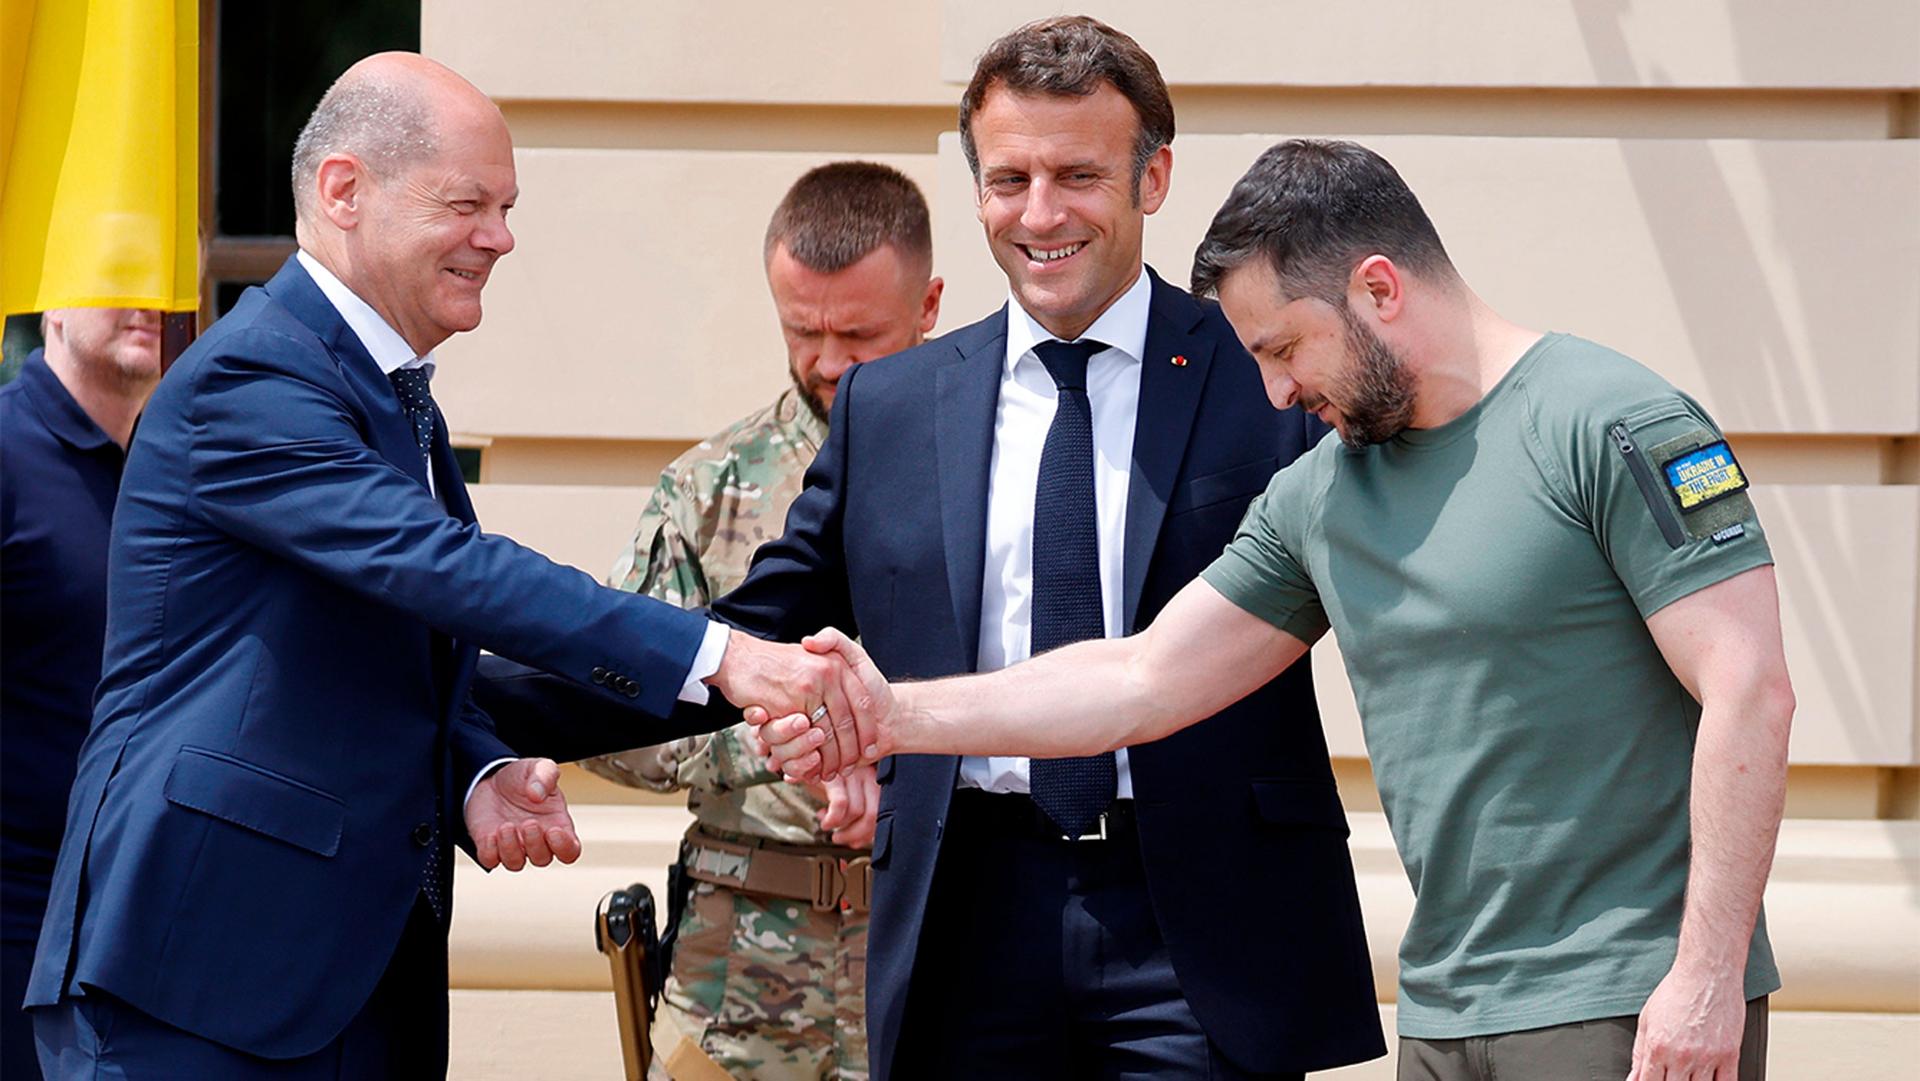 German Chancellor Olaf Scholz, left, shakes hands with Ukrainian President Volodymyr Zelenskyy, as French President Emmanuel Macron, looks on before a meeting in Kyiv, Ukraine